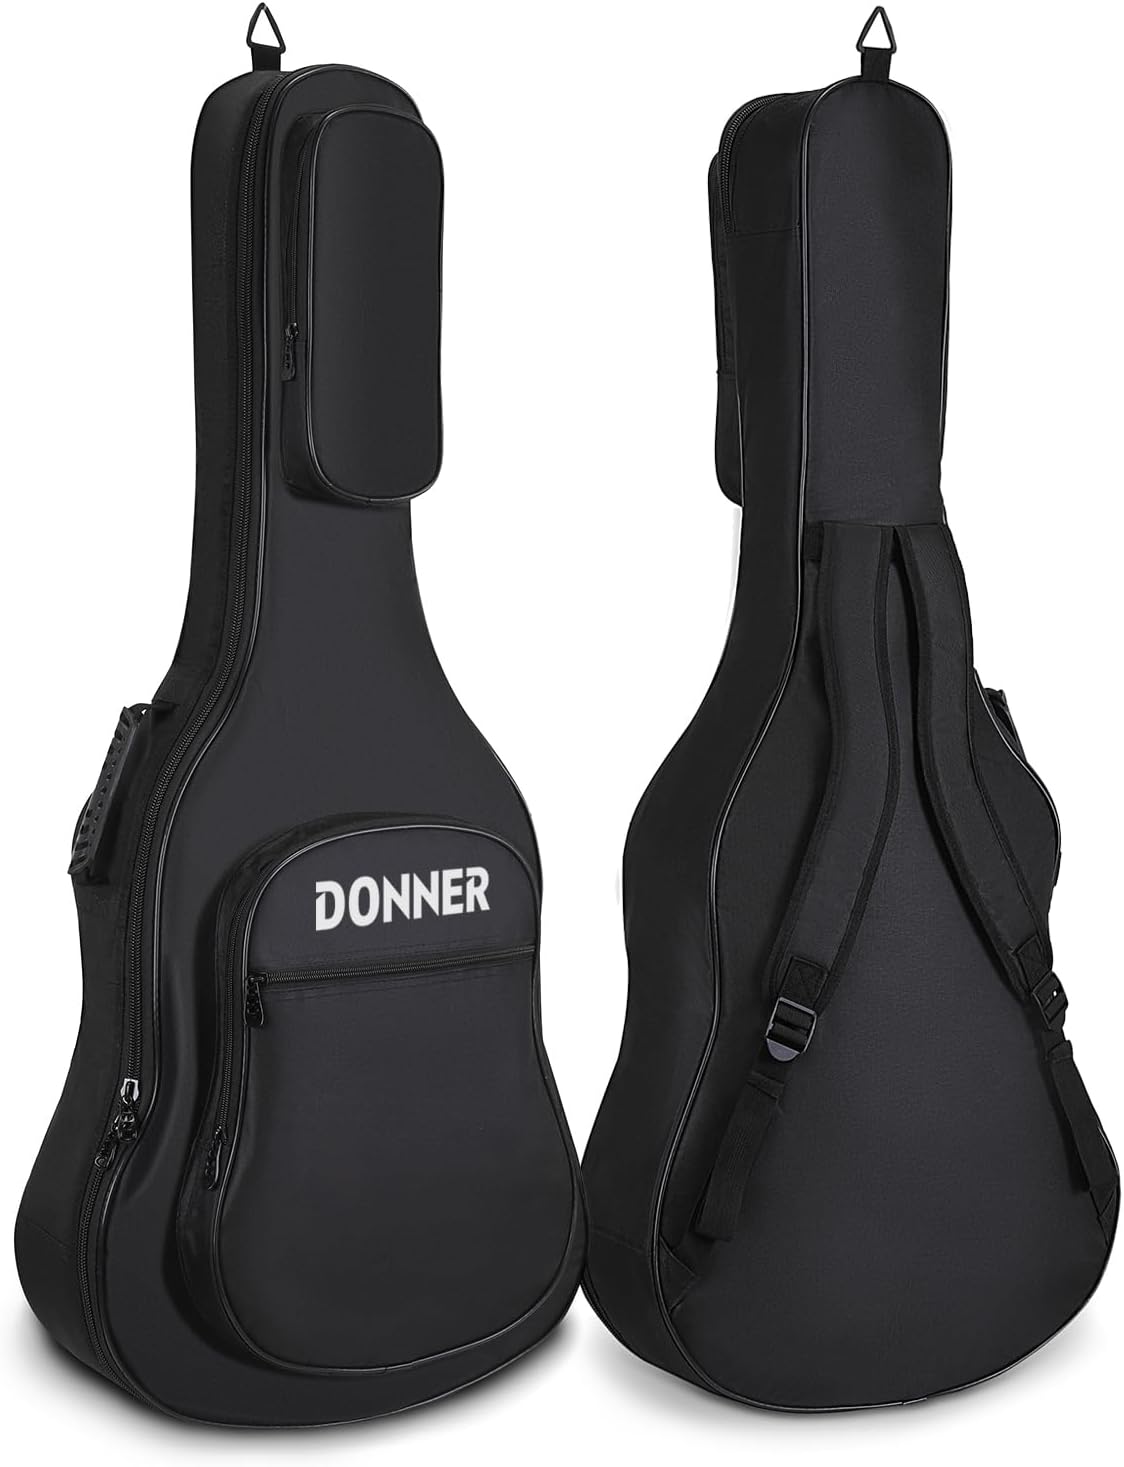 Donner 36 Inch Acoustic Guitar Case, 0.4 Inch Thick Padding Sponge 600D Ripstop Waterproof Nylon Soft Guitar Gig Bag with 3 Pockets and Back Hanger Loop, Black Acoustic bag 36 inch-10mm Thick